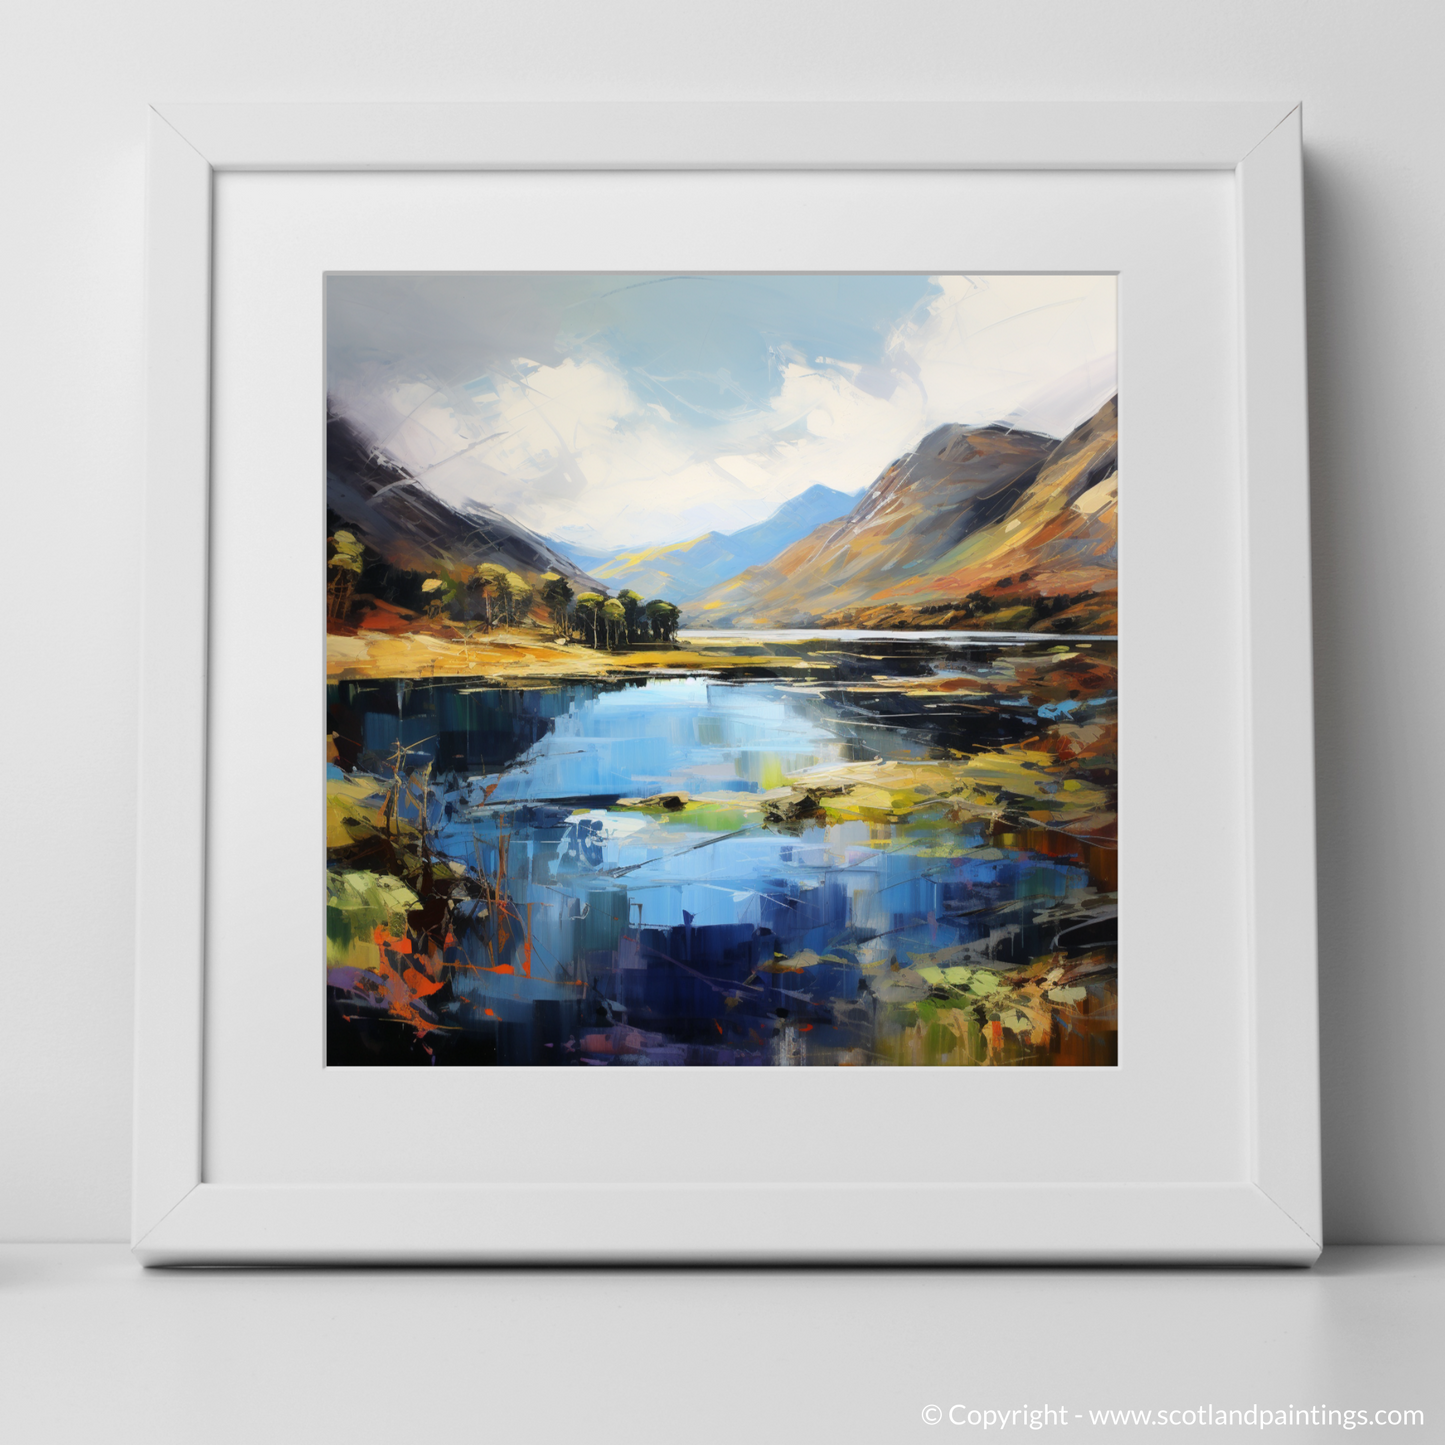 Art Print of Loch Shiel, Highlands with a white frame